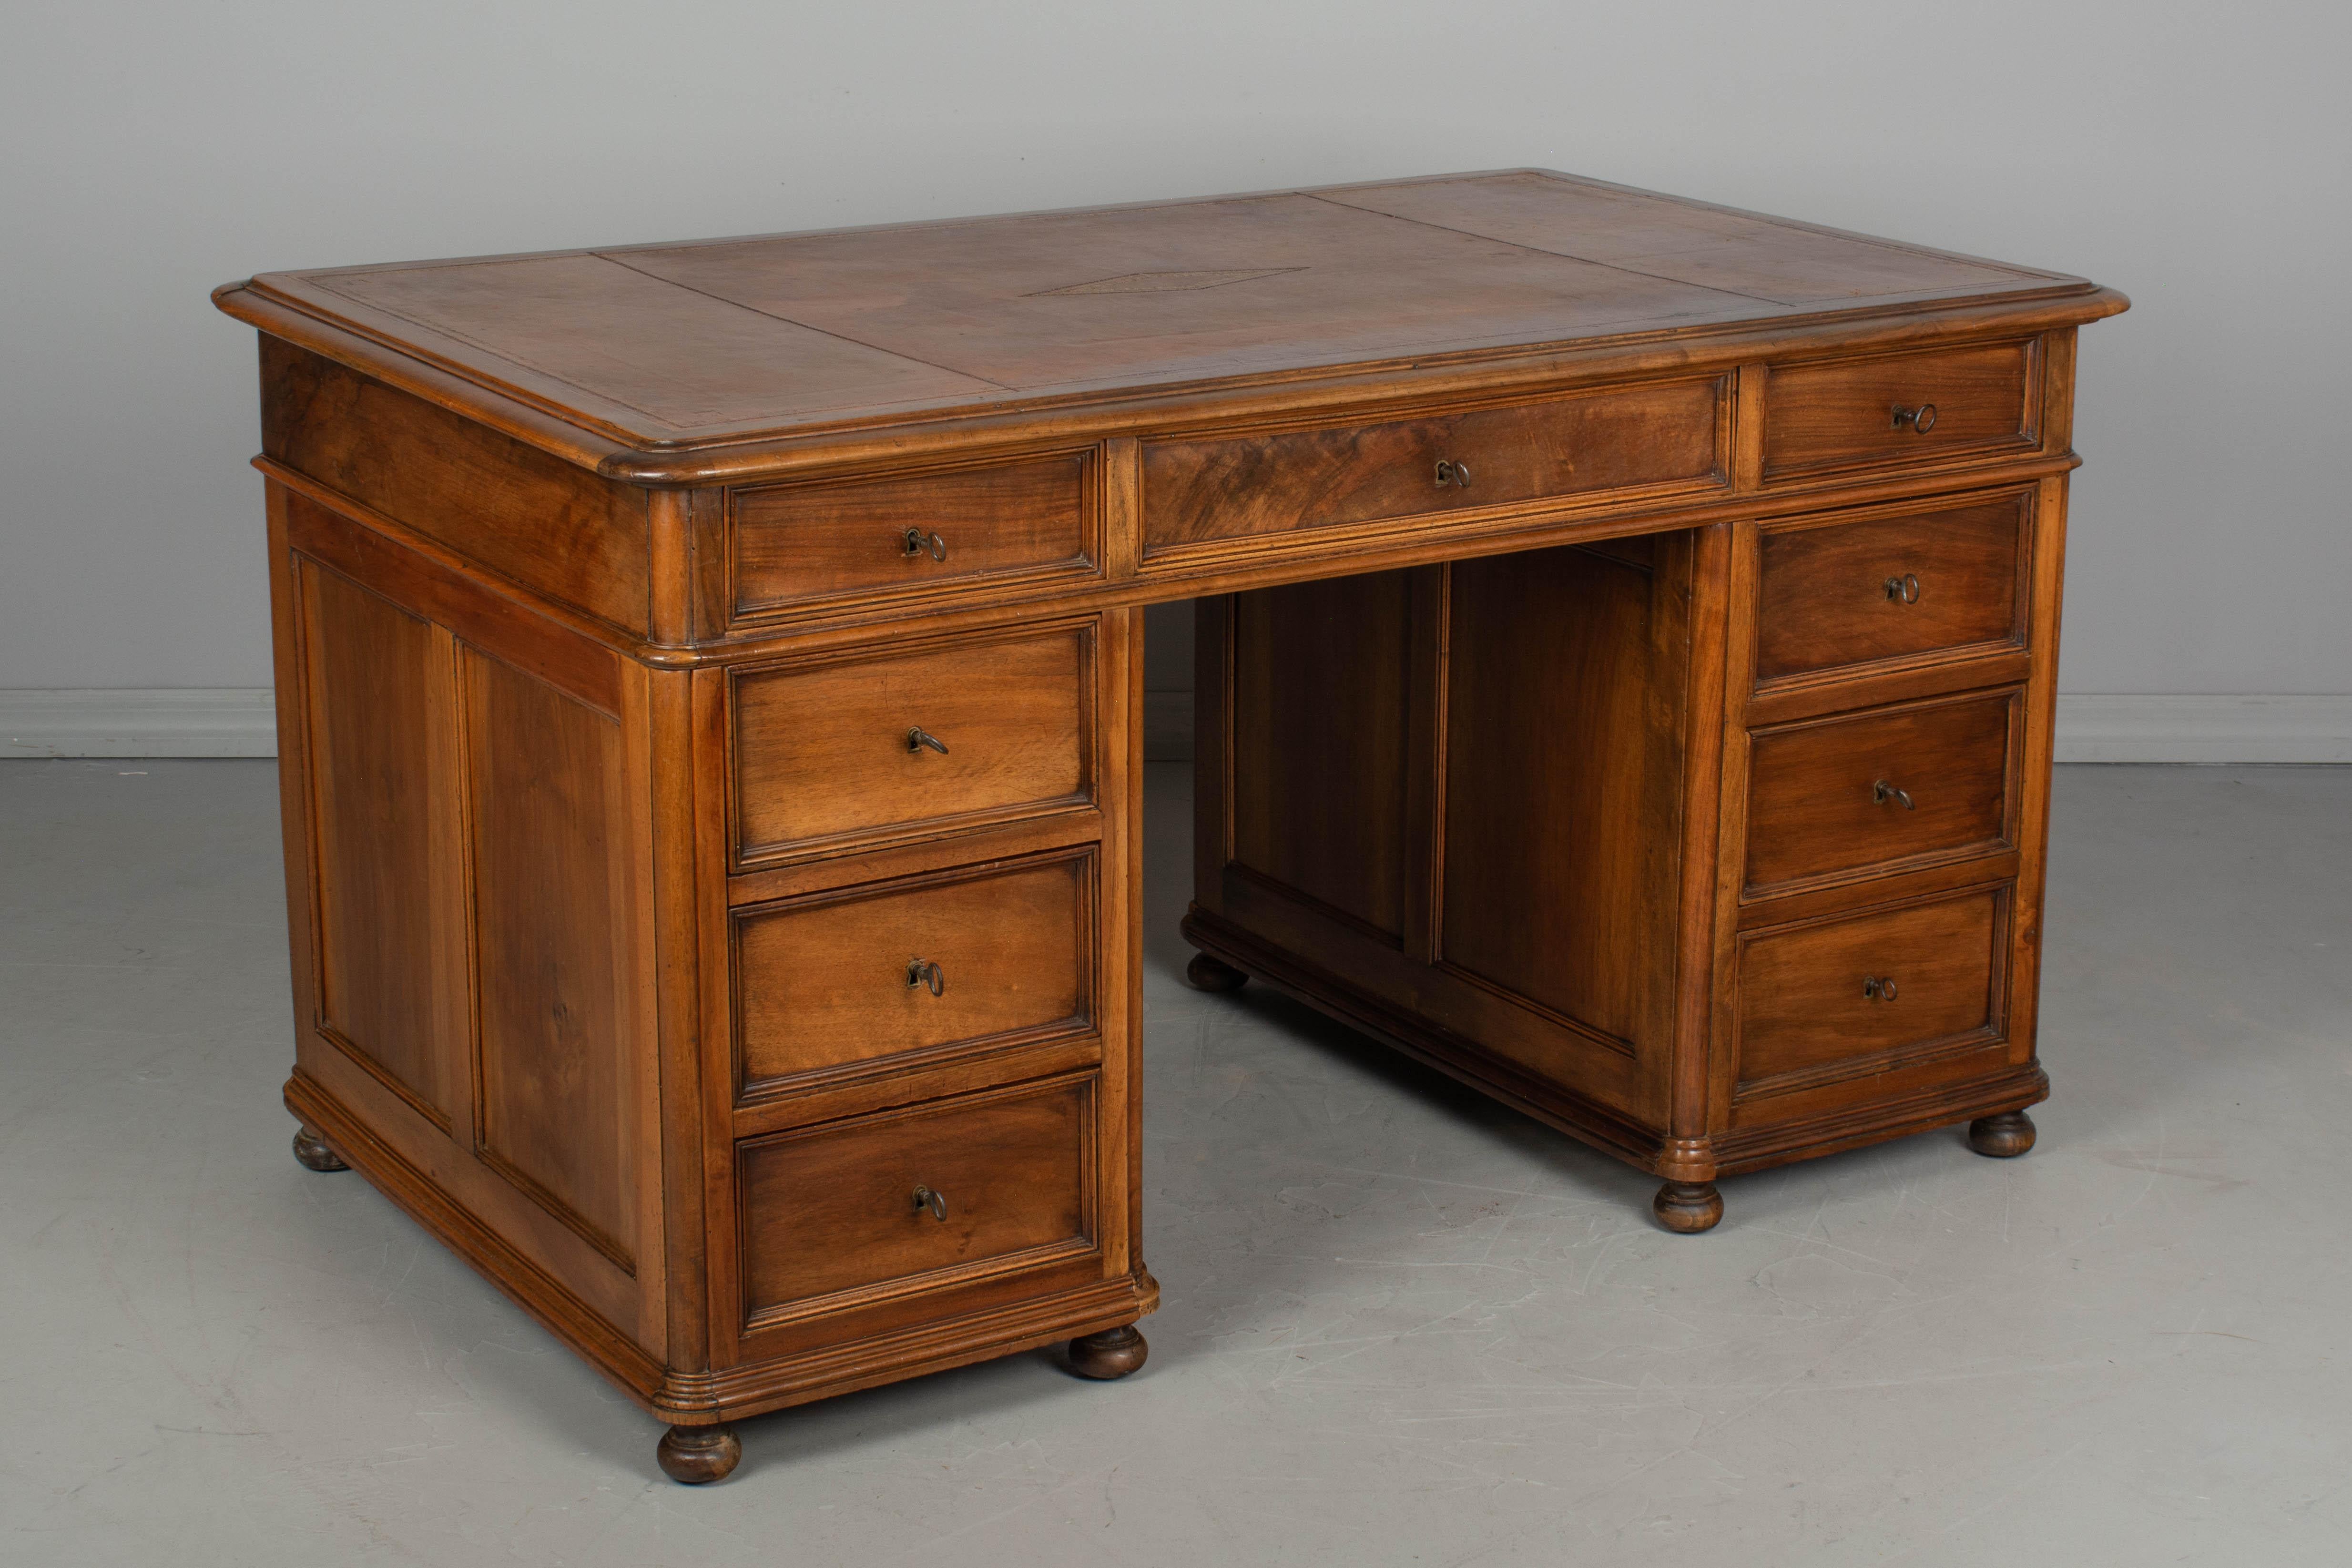 A French Louis-Philippe style partners desk and office chair. This large desk is made of solid walnut and retains the original leather writing surface. Comprised of three parts, the tabletop, with three shallow drawers, rests on top of a pair of